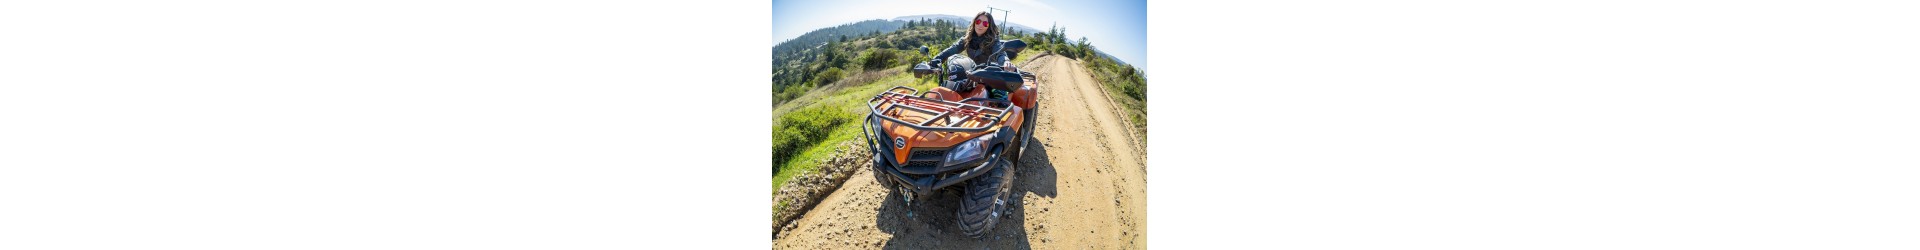 Quad Adventure: Feel the Power and Excitement of Off-Road Riding!